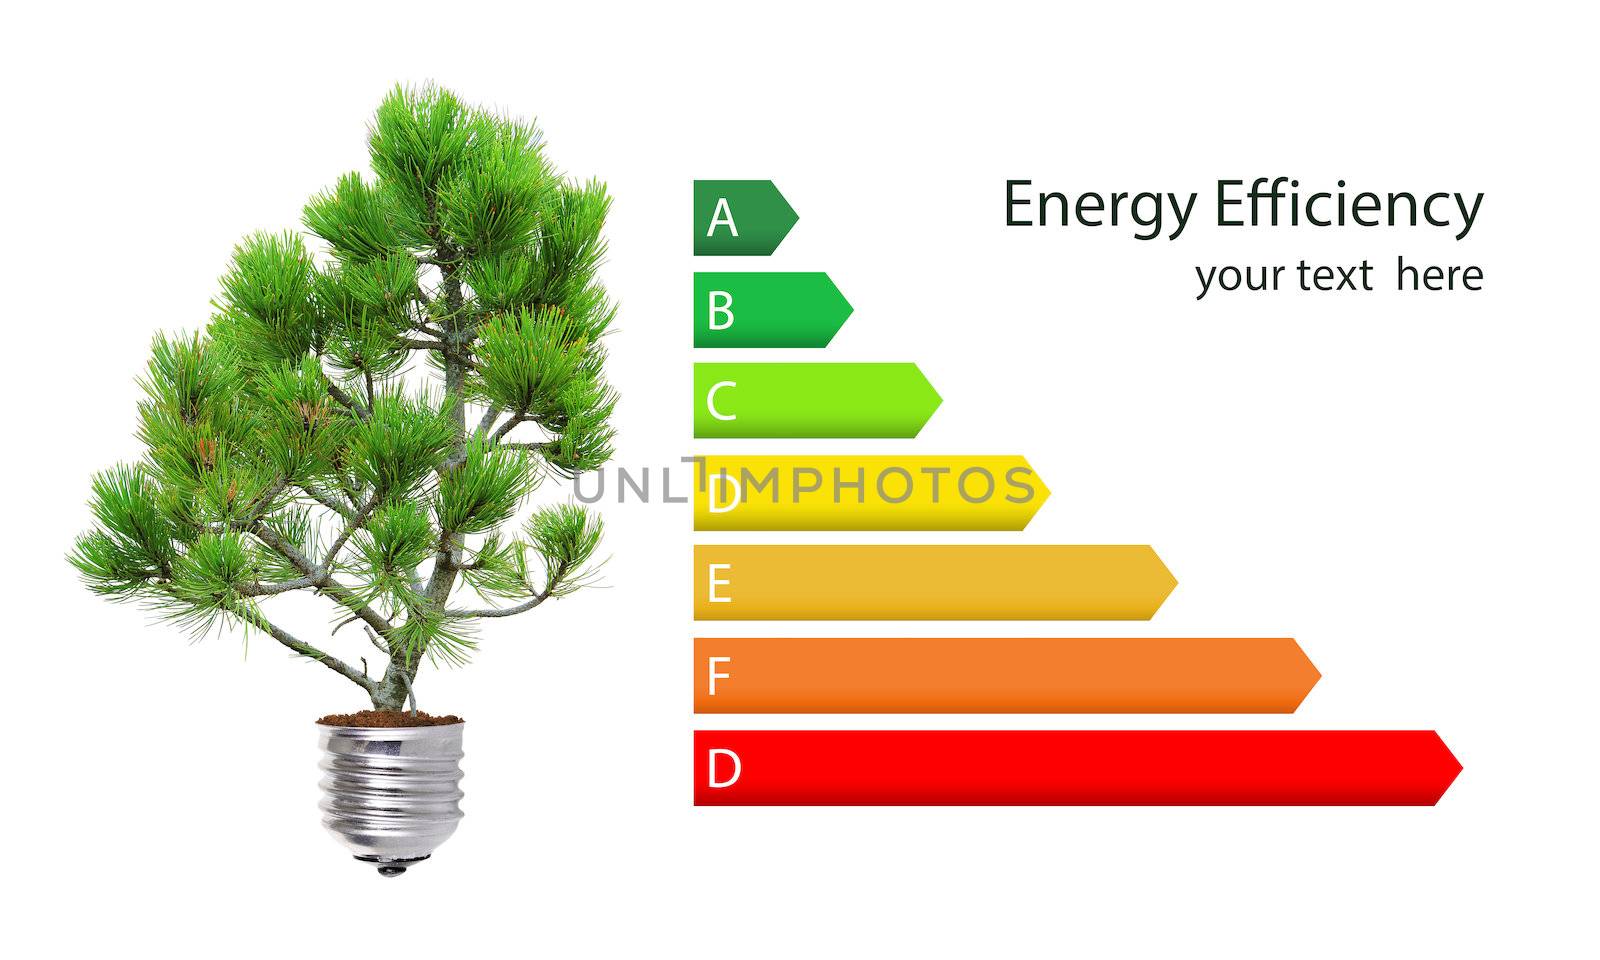 Energy efficiency rating and green lightbulb concept isolated over white
